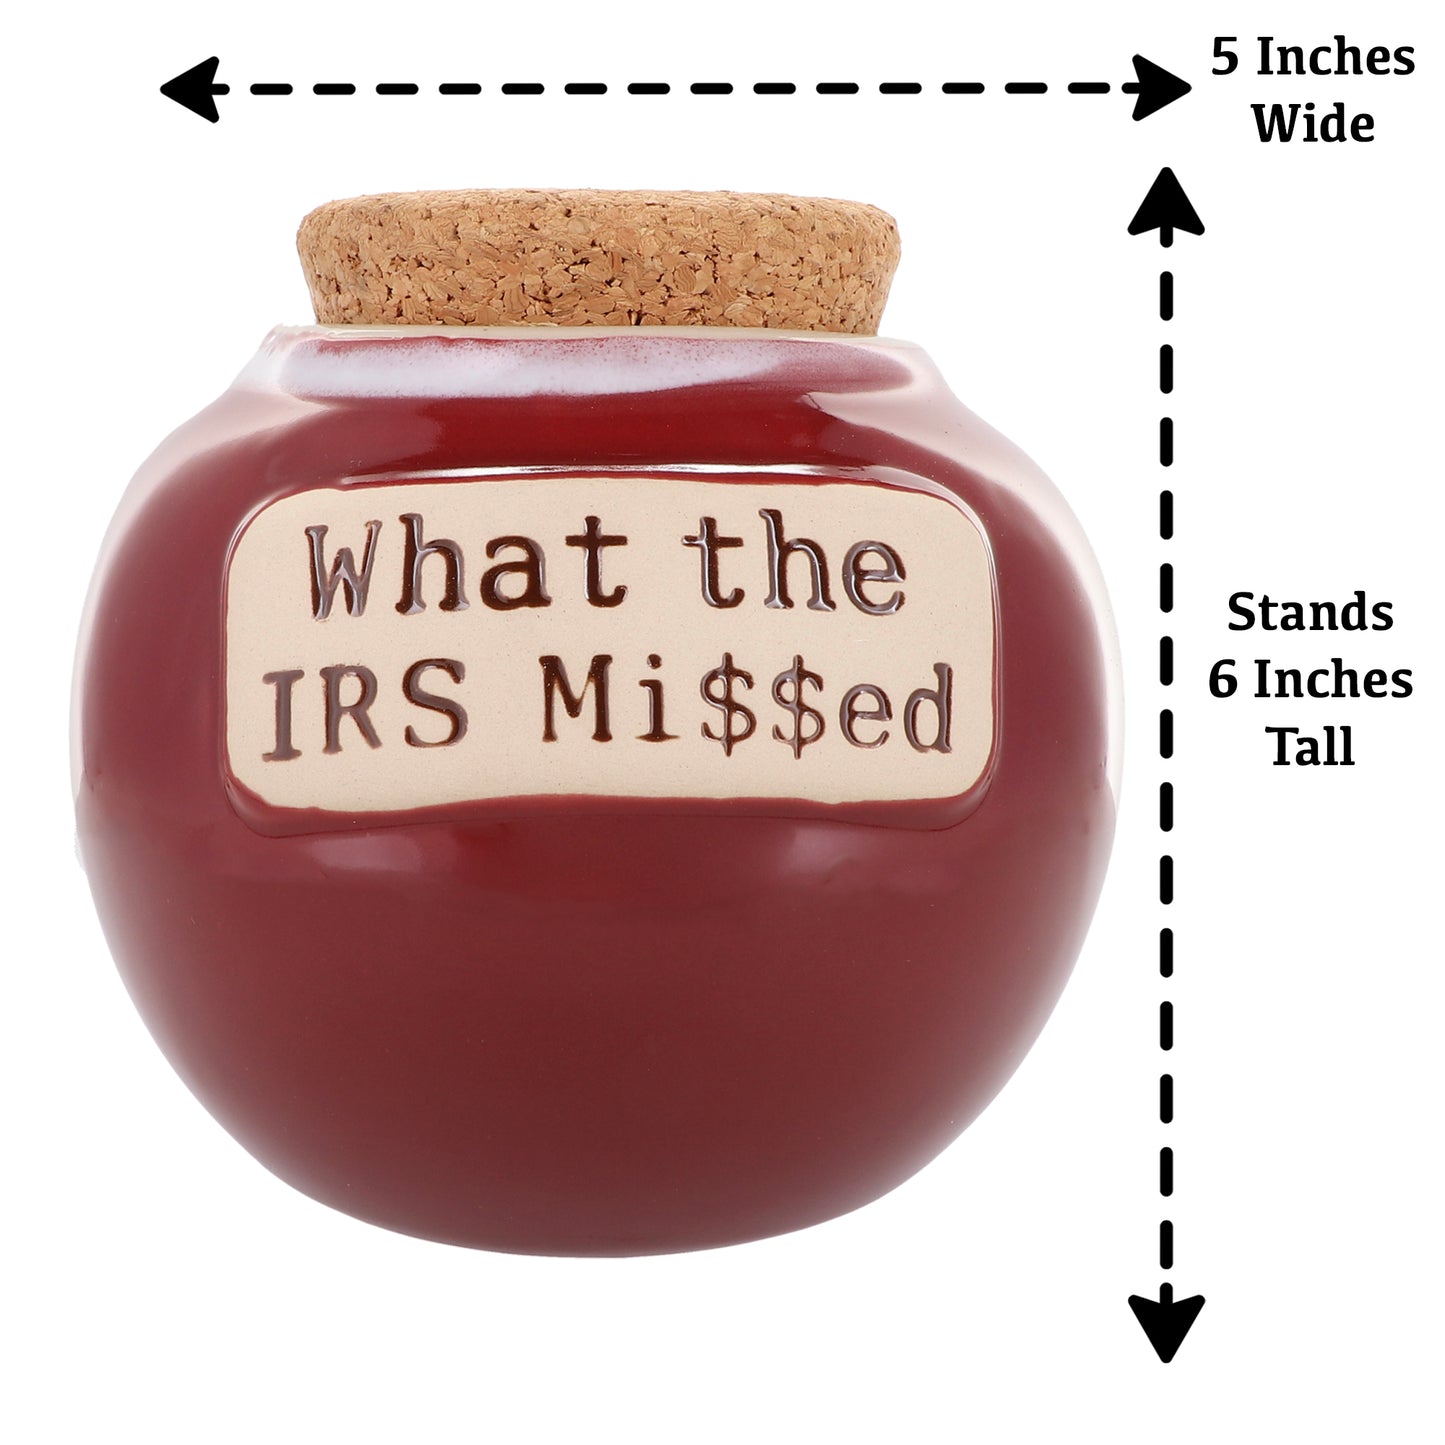 Cottage Creek What the IRS Mi$$ed Piggy Bank, Ceramic, 6" Red Office Candy Jar